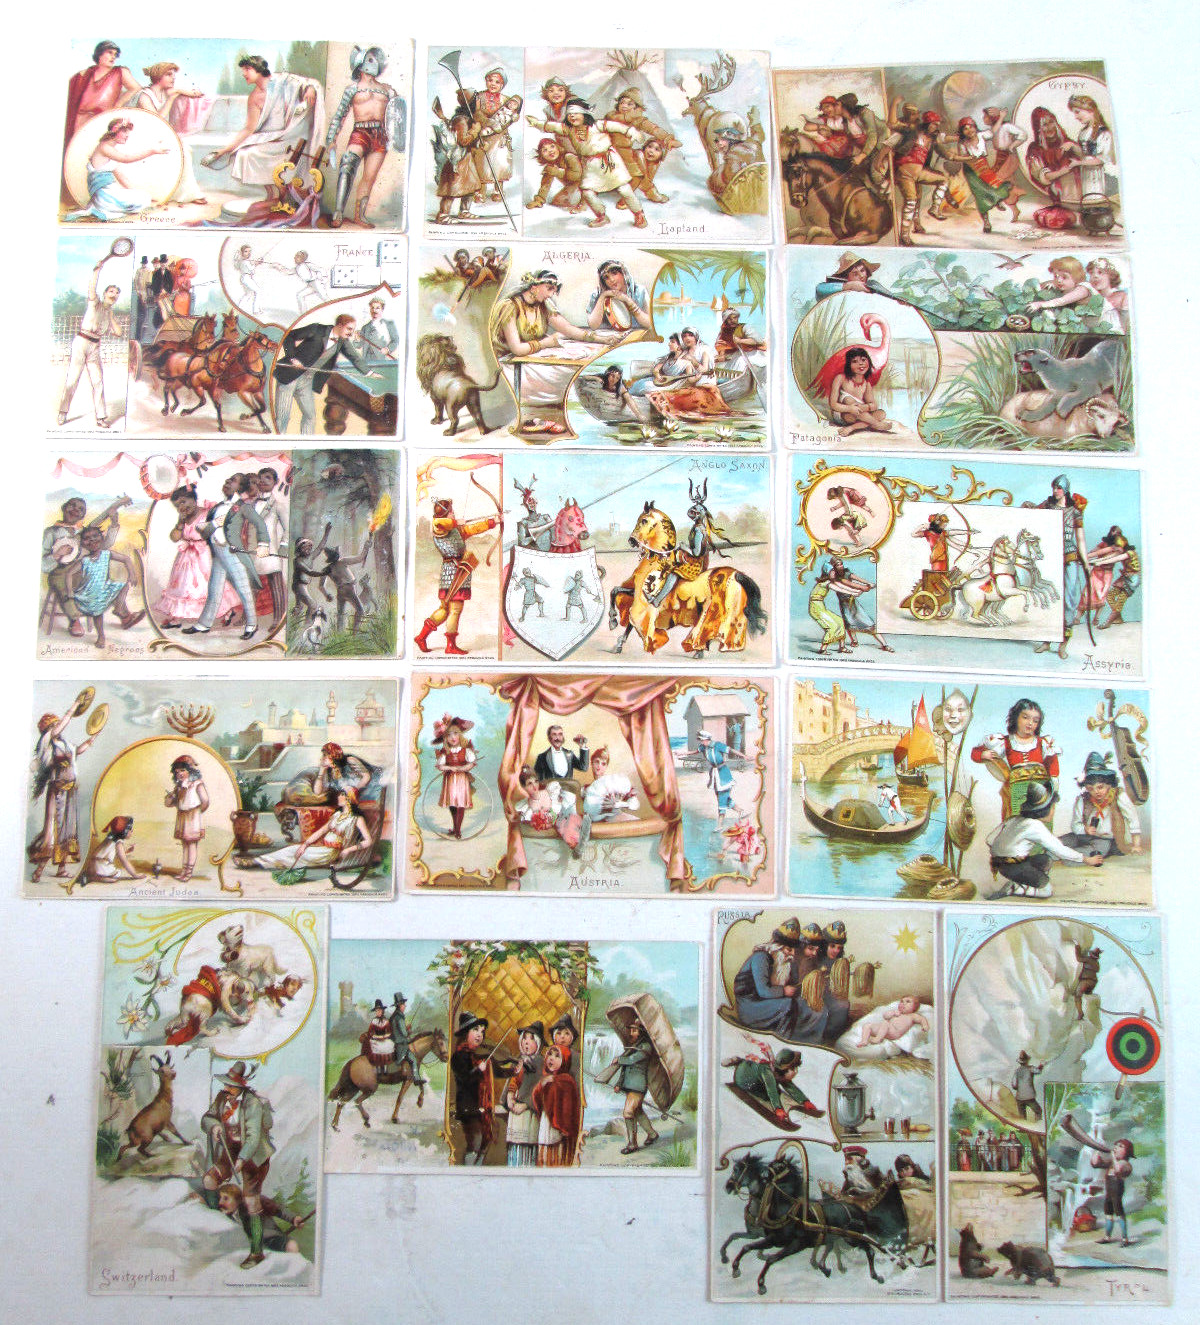 Arbuckle Bros. Coffee Trading Cards Antique Vintage 1890s Americana Lot of 16